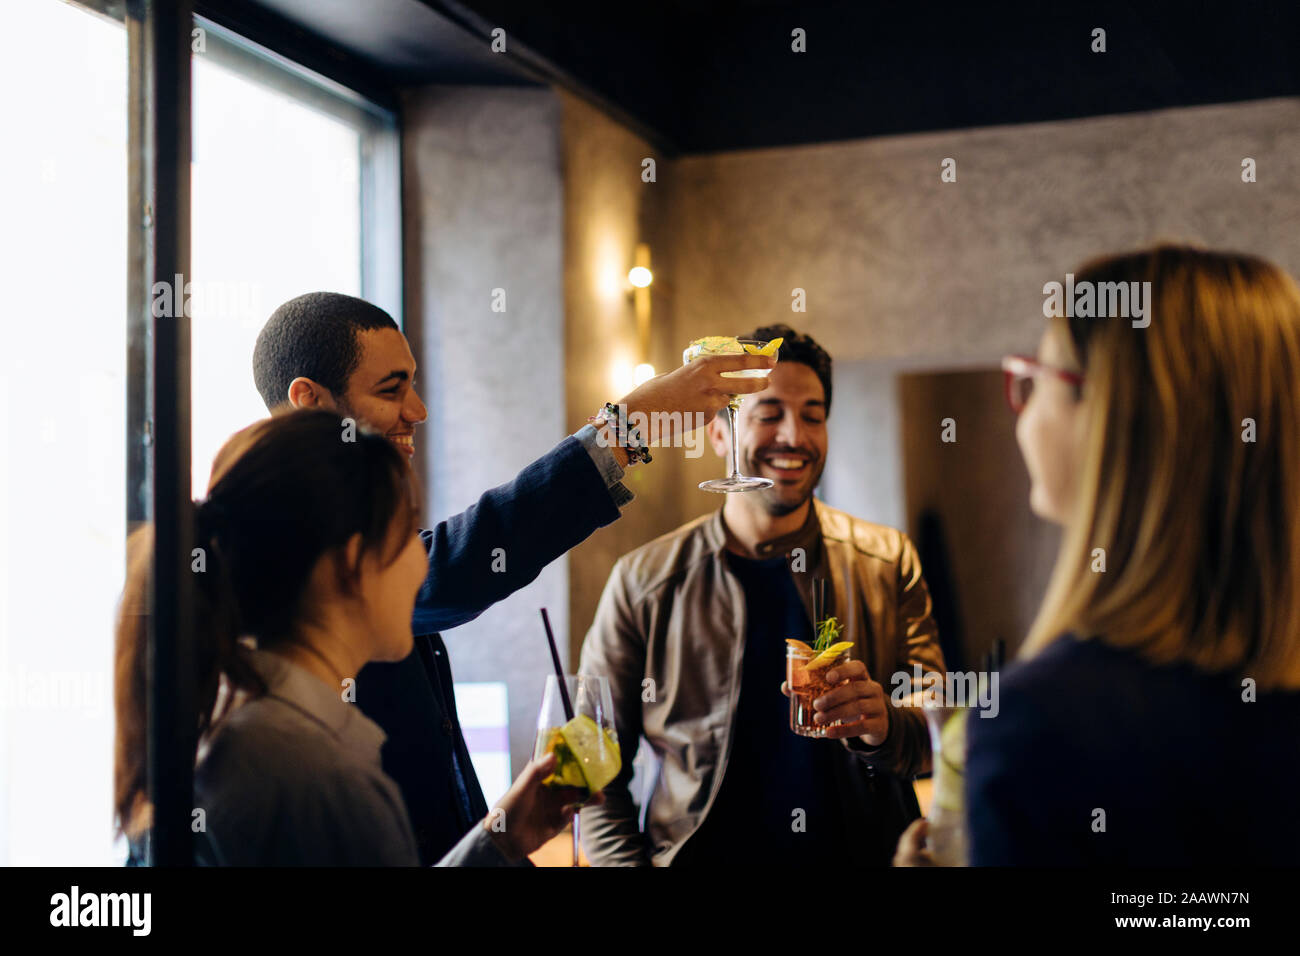 Colleagues celebrating after work in a bar Stock Photo